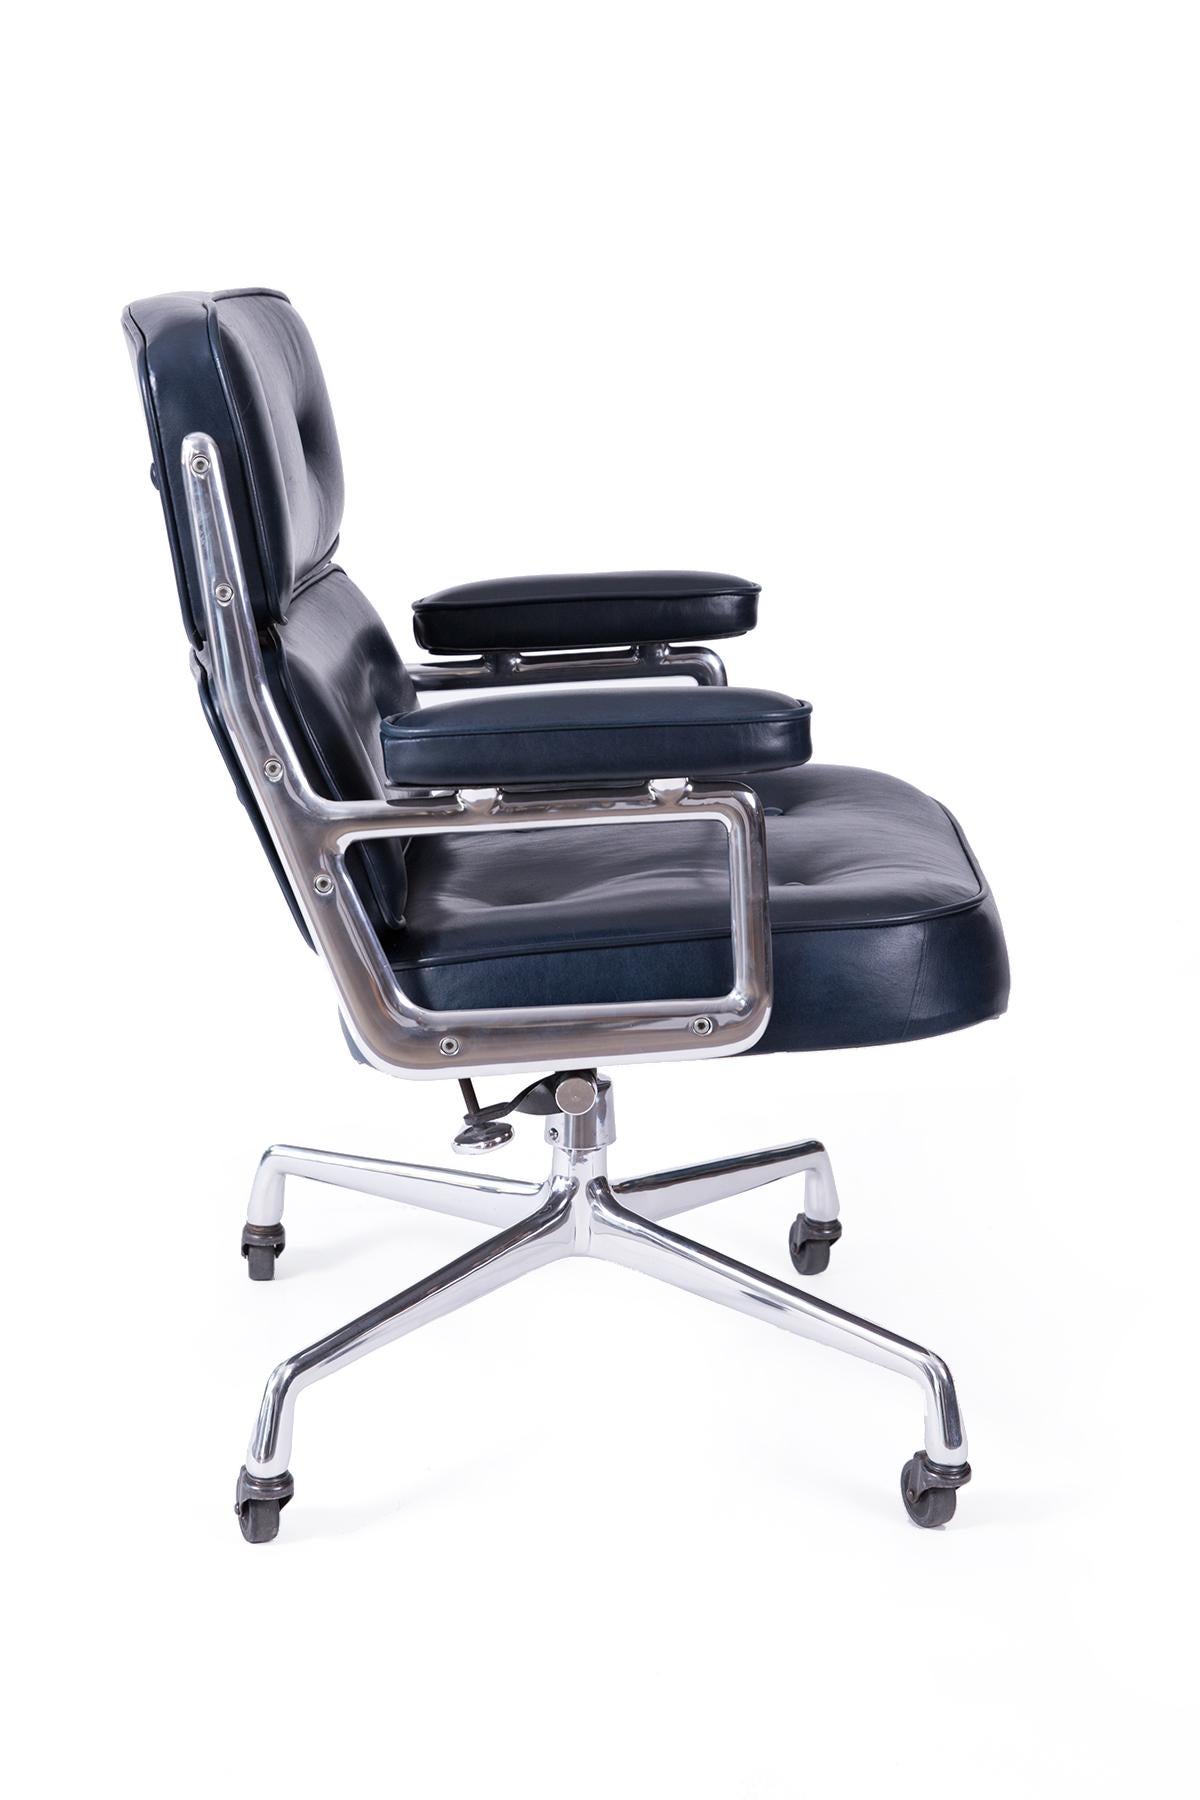 Also known as the Time-Life chair, this iconic office seating was originally created for the executive floors of New York City’s Time-Life building by Charles Eames for Herman Miller. The generously sized Eames executive chair tilts, swivels and has